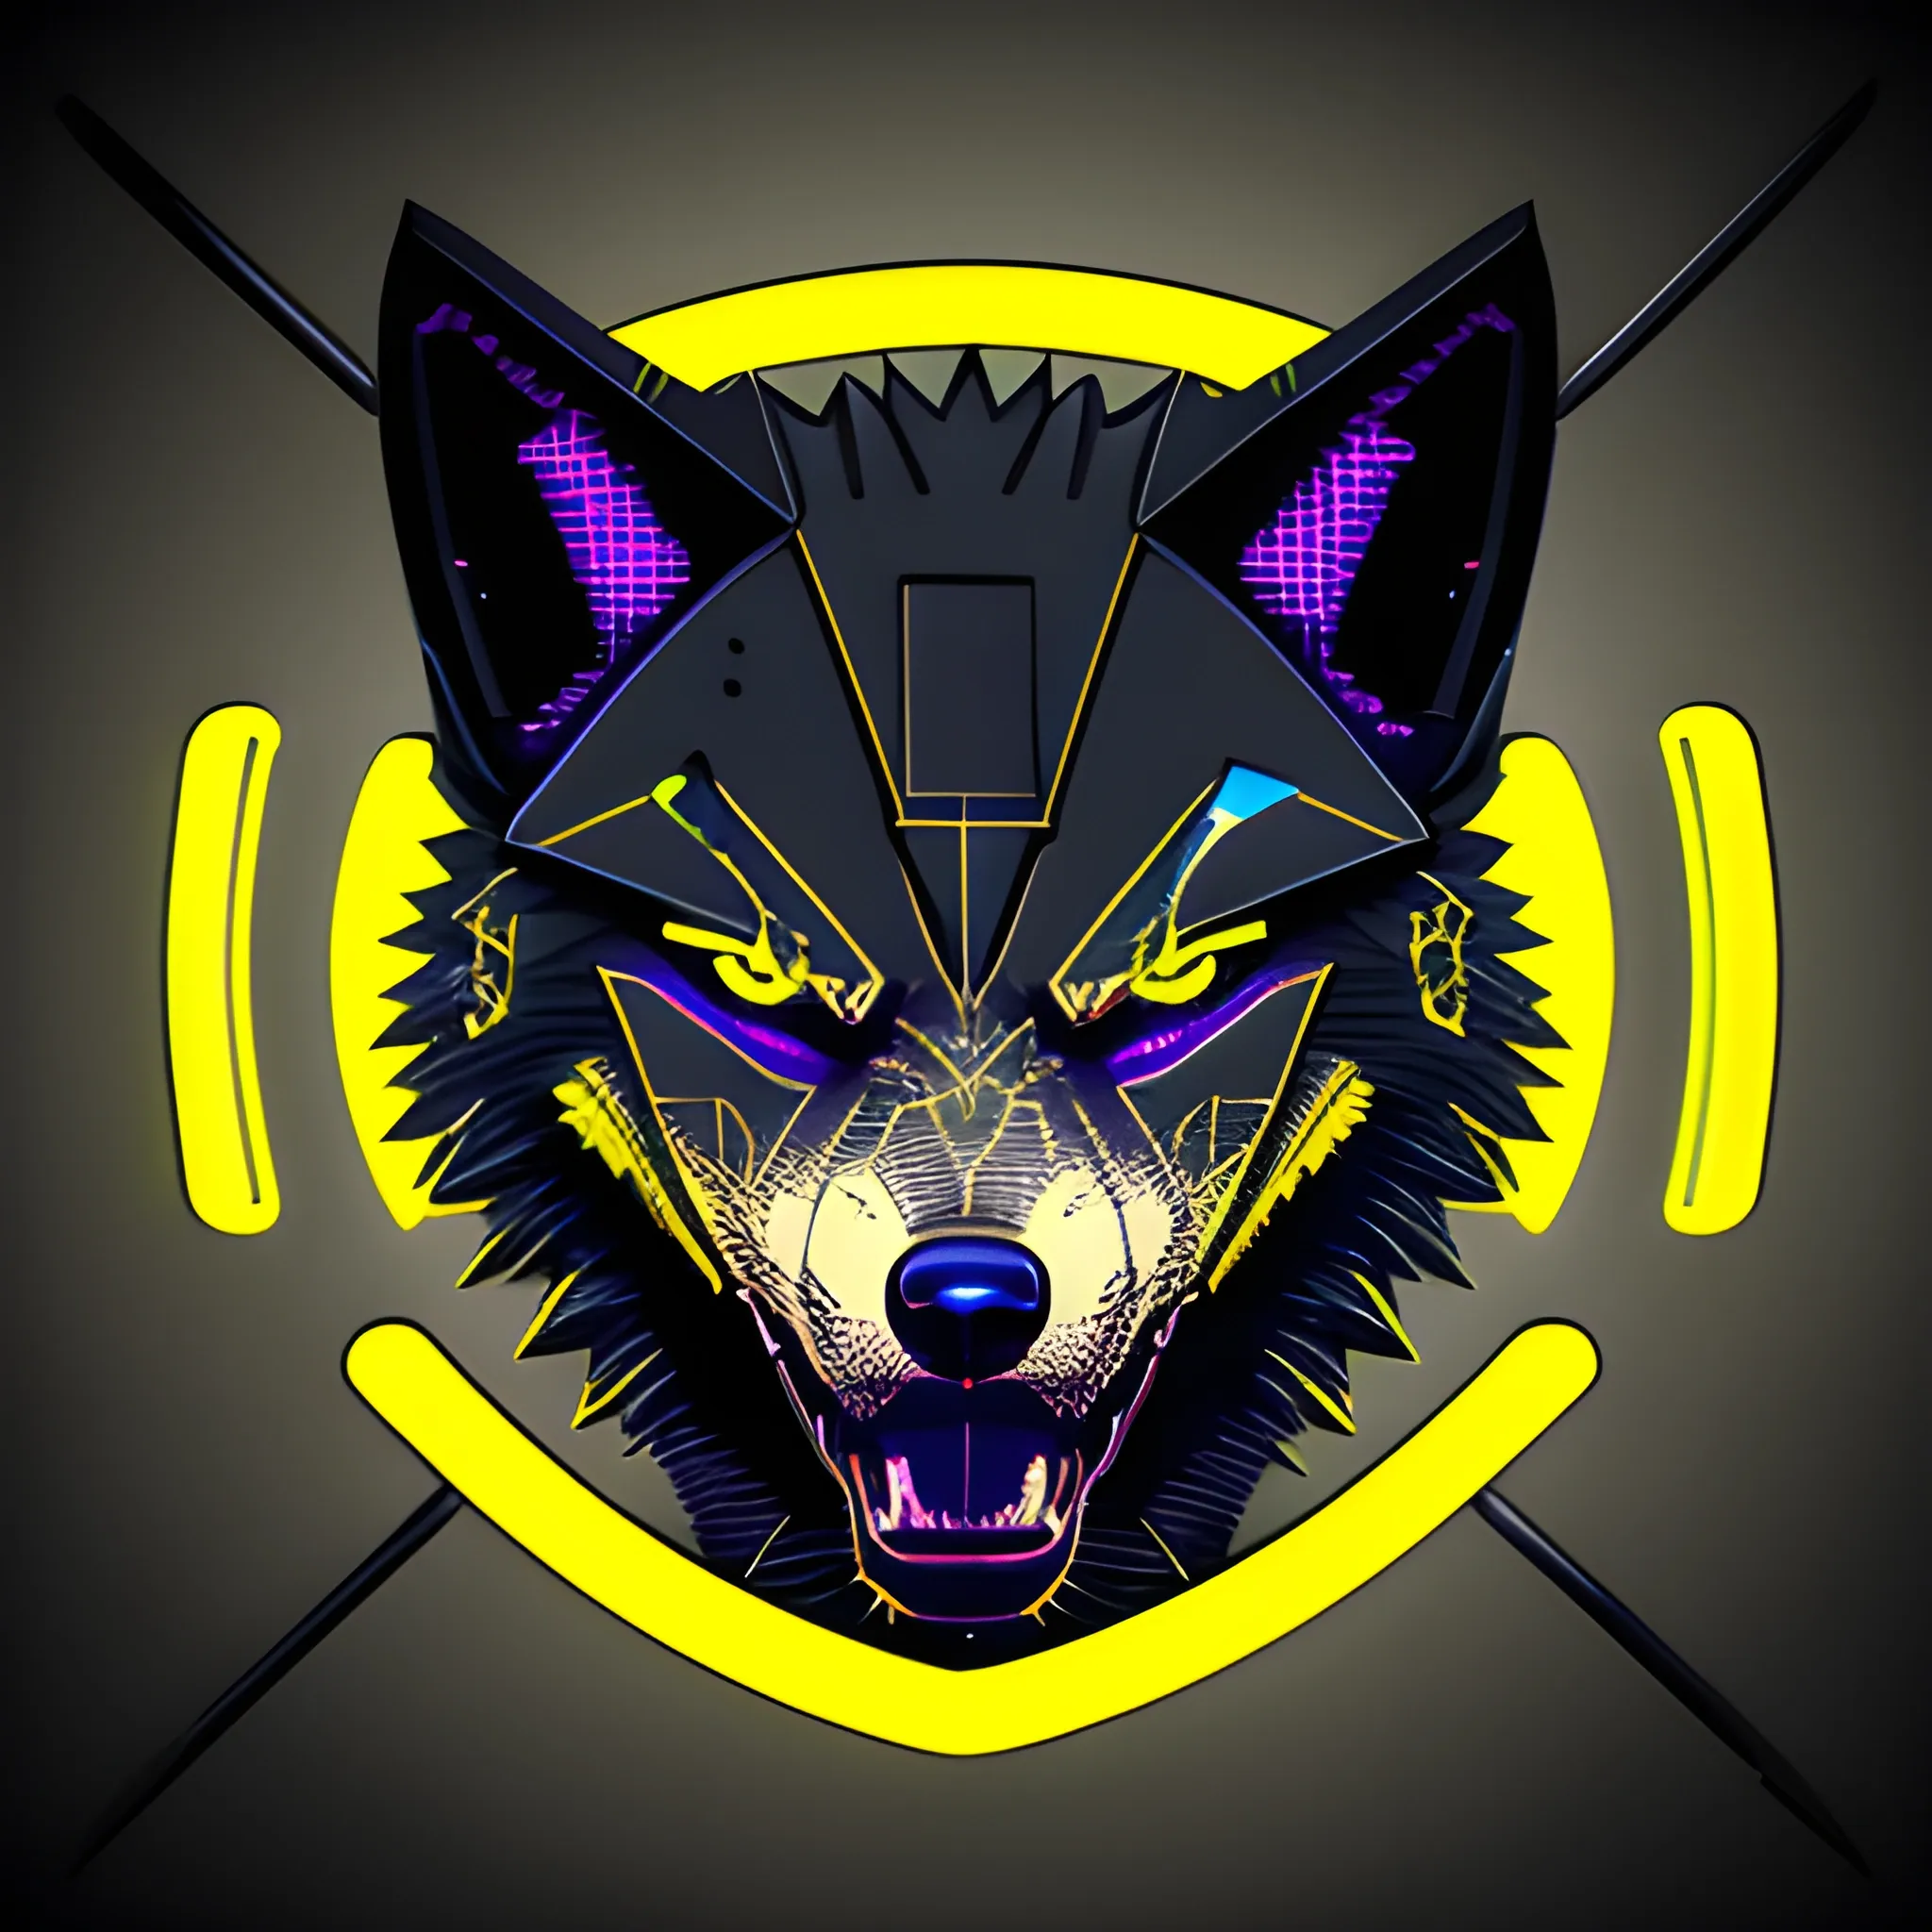 An angry cyberpunk wolf logo with the letter "A" at the background, using the yellow neon color, 3D